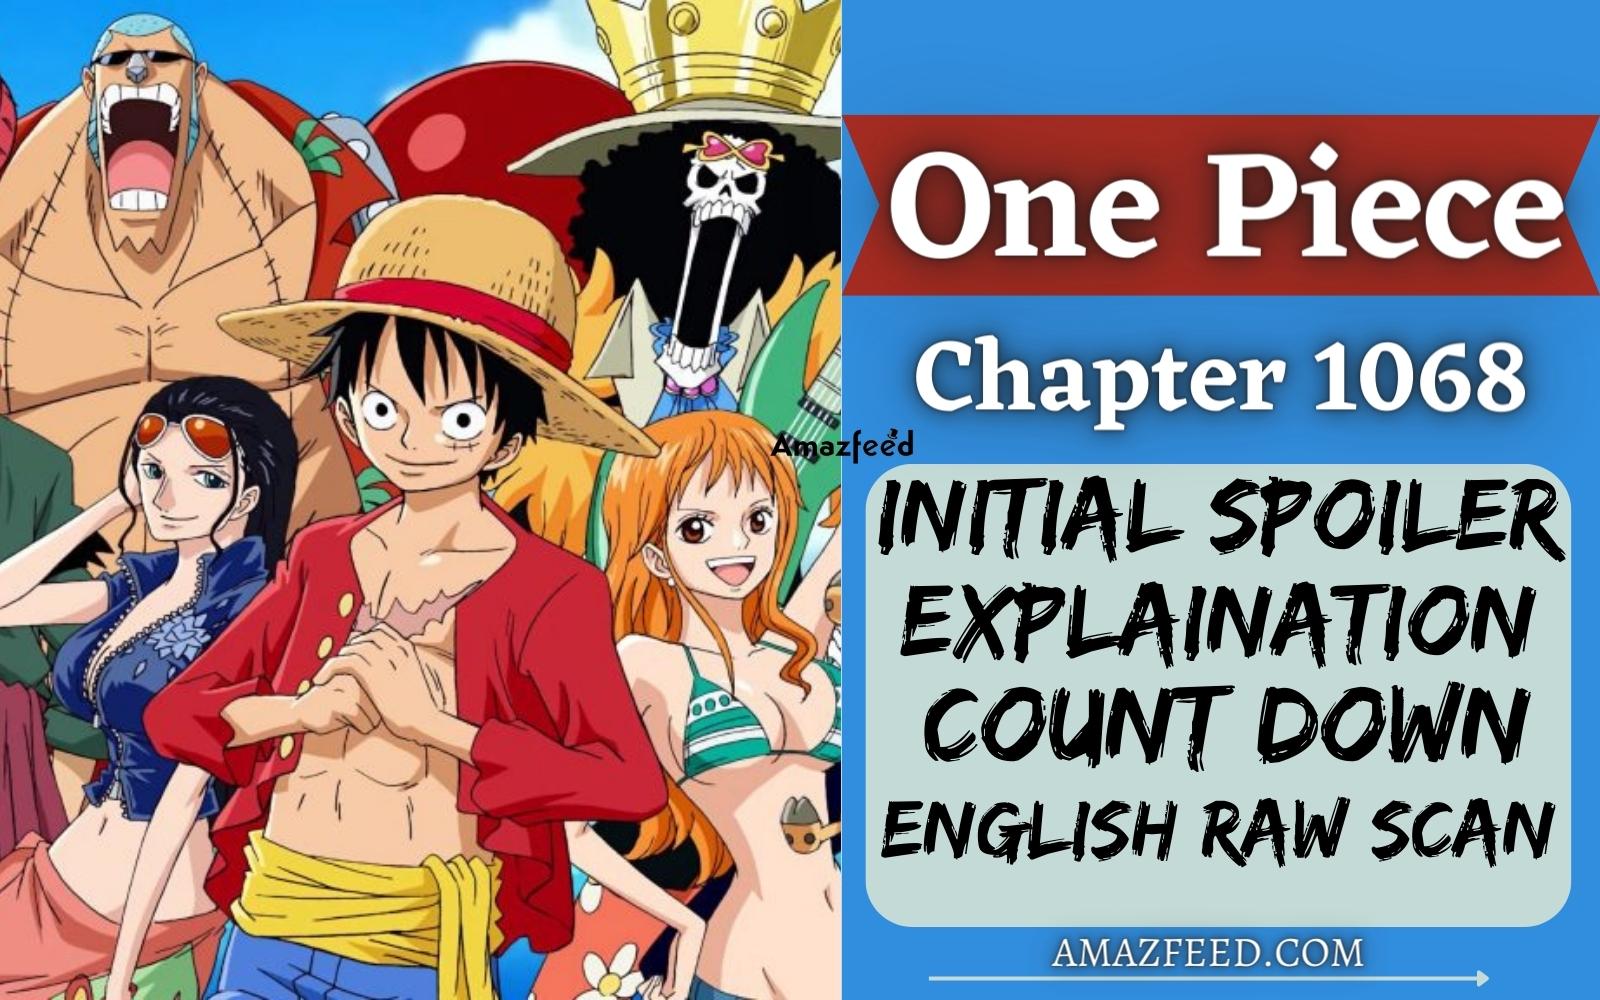 One Piece Chapter 1068 Initial Spoilers, Count Down, English Raw Scan, Release Date, & Everything You Want to Know